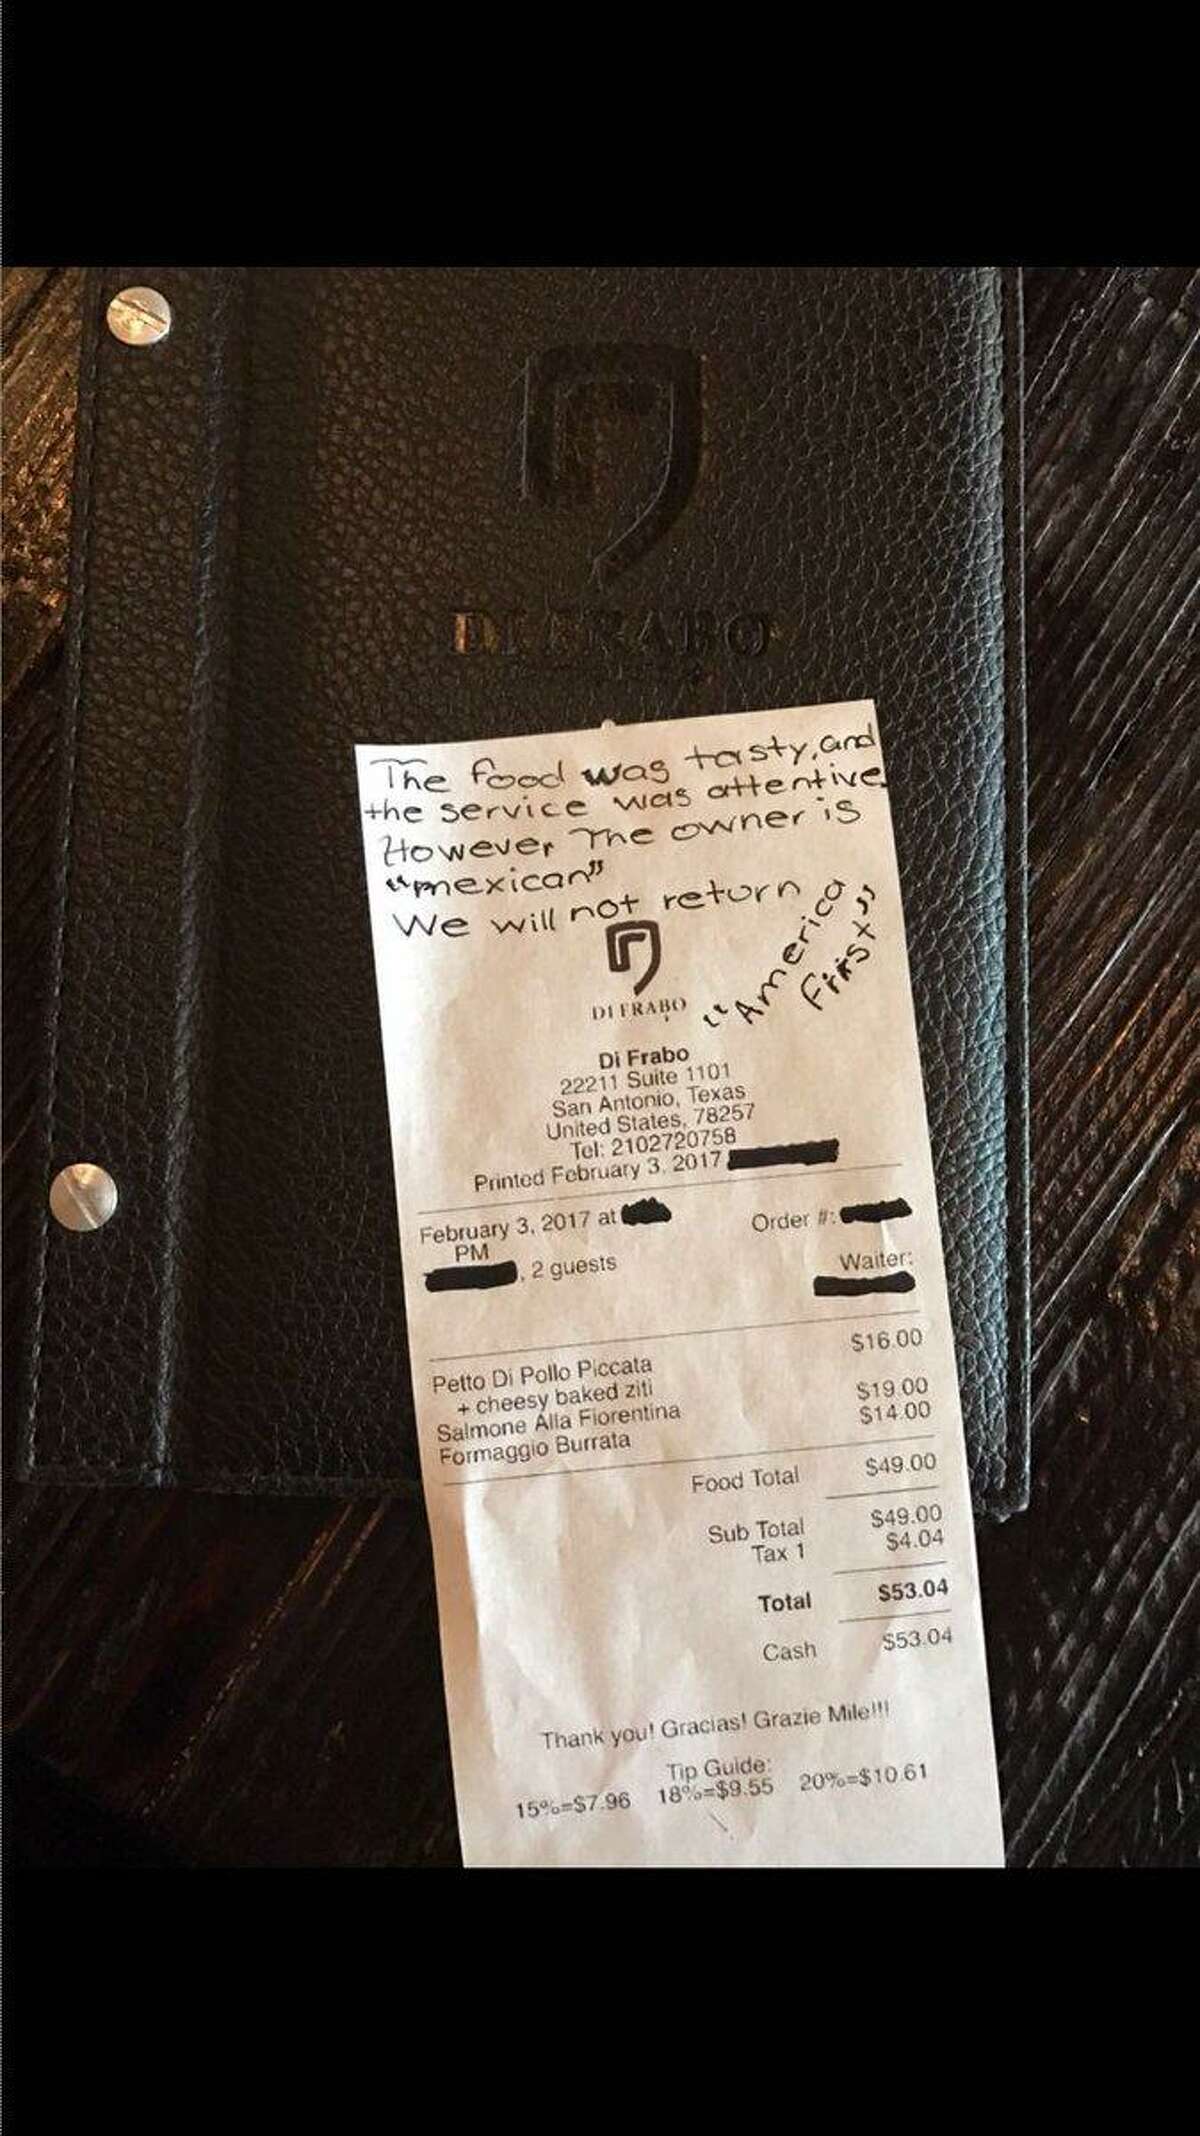 Customers at Di Frabo Ristorante Italiano near near the Dominion development allegedly left a racist message for the restaurant’s owner Friday, vowing not to return because he is Mexican. “The food was tasty and the service was attentive. However, the owner is ‘Mexican.’ We will not return. ‘America First.’” The customers racked up a $53 tab before allegedly leaving the racist message.